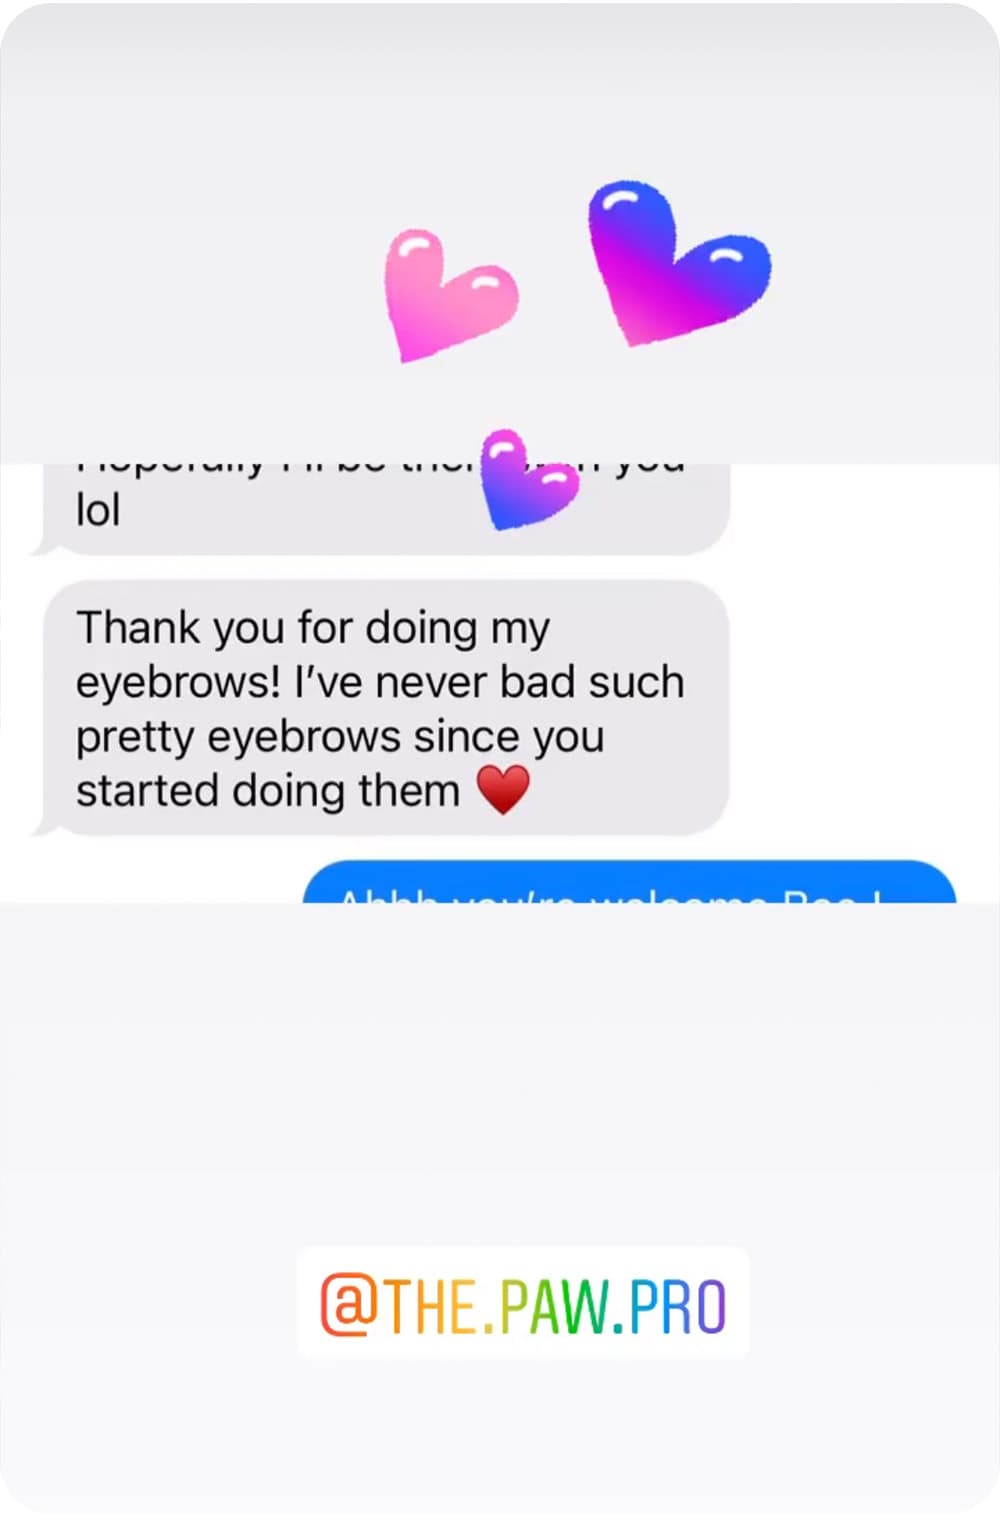 thank you for doing my eyebrows! Ive never had such pretty eyebrows since you started doing them